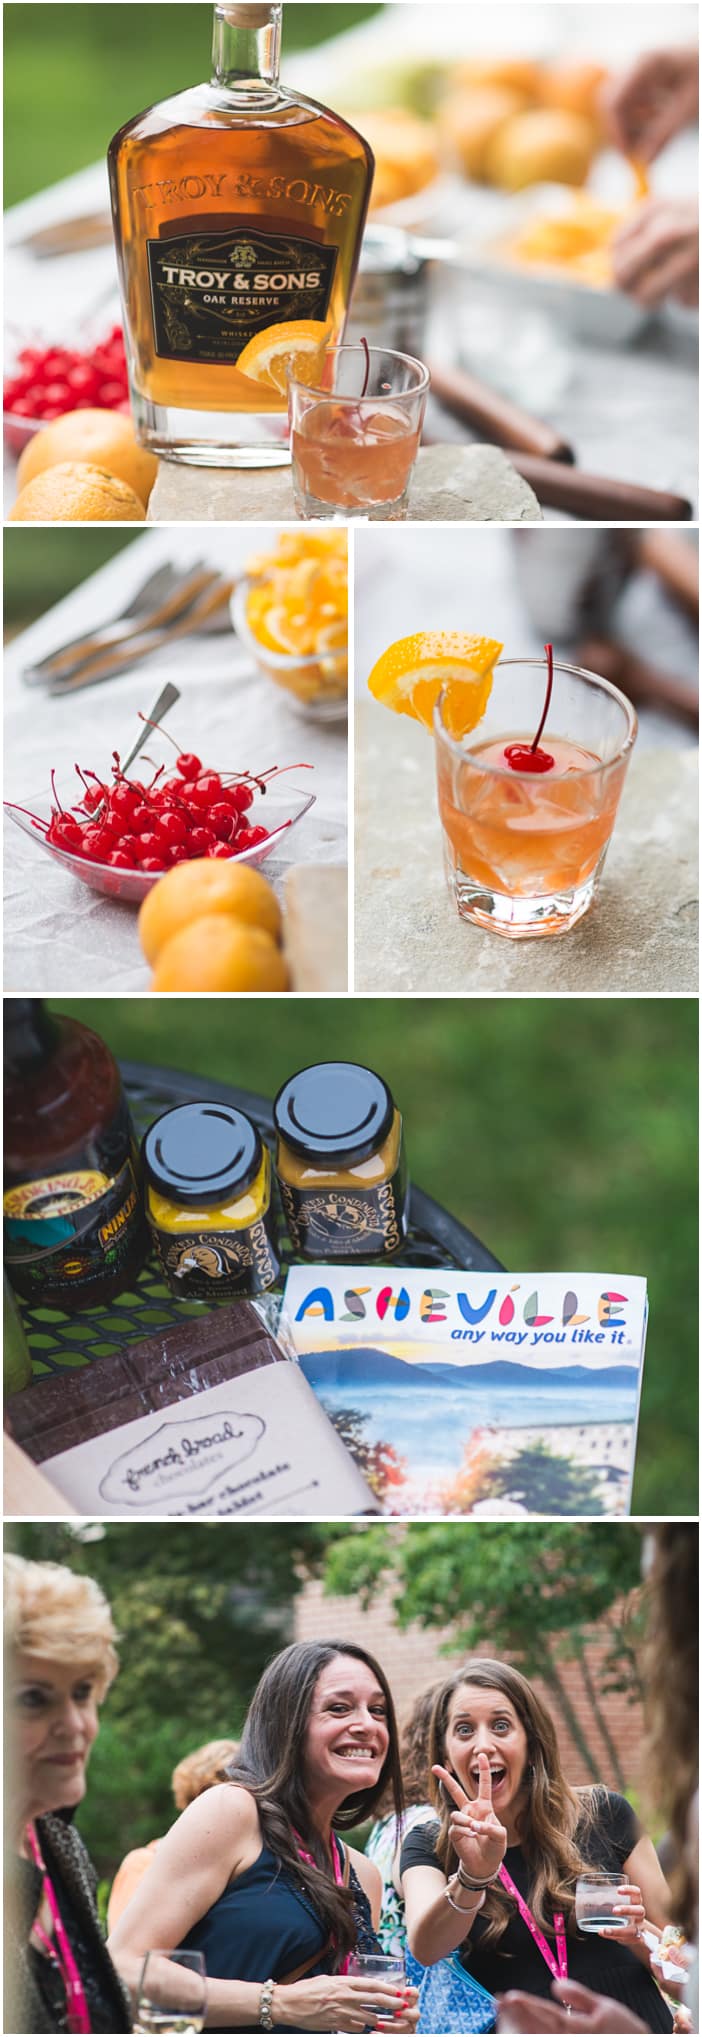 Asheville North Carolina Food & Culture with Food Blog Forum and @whiteonrice